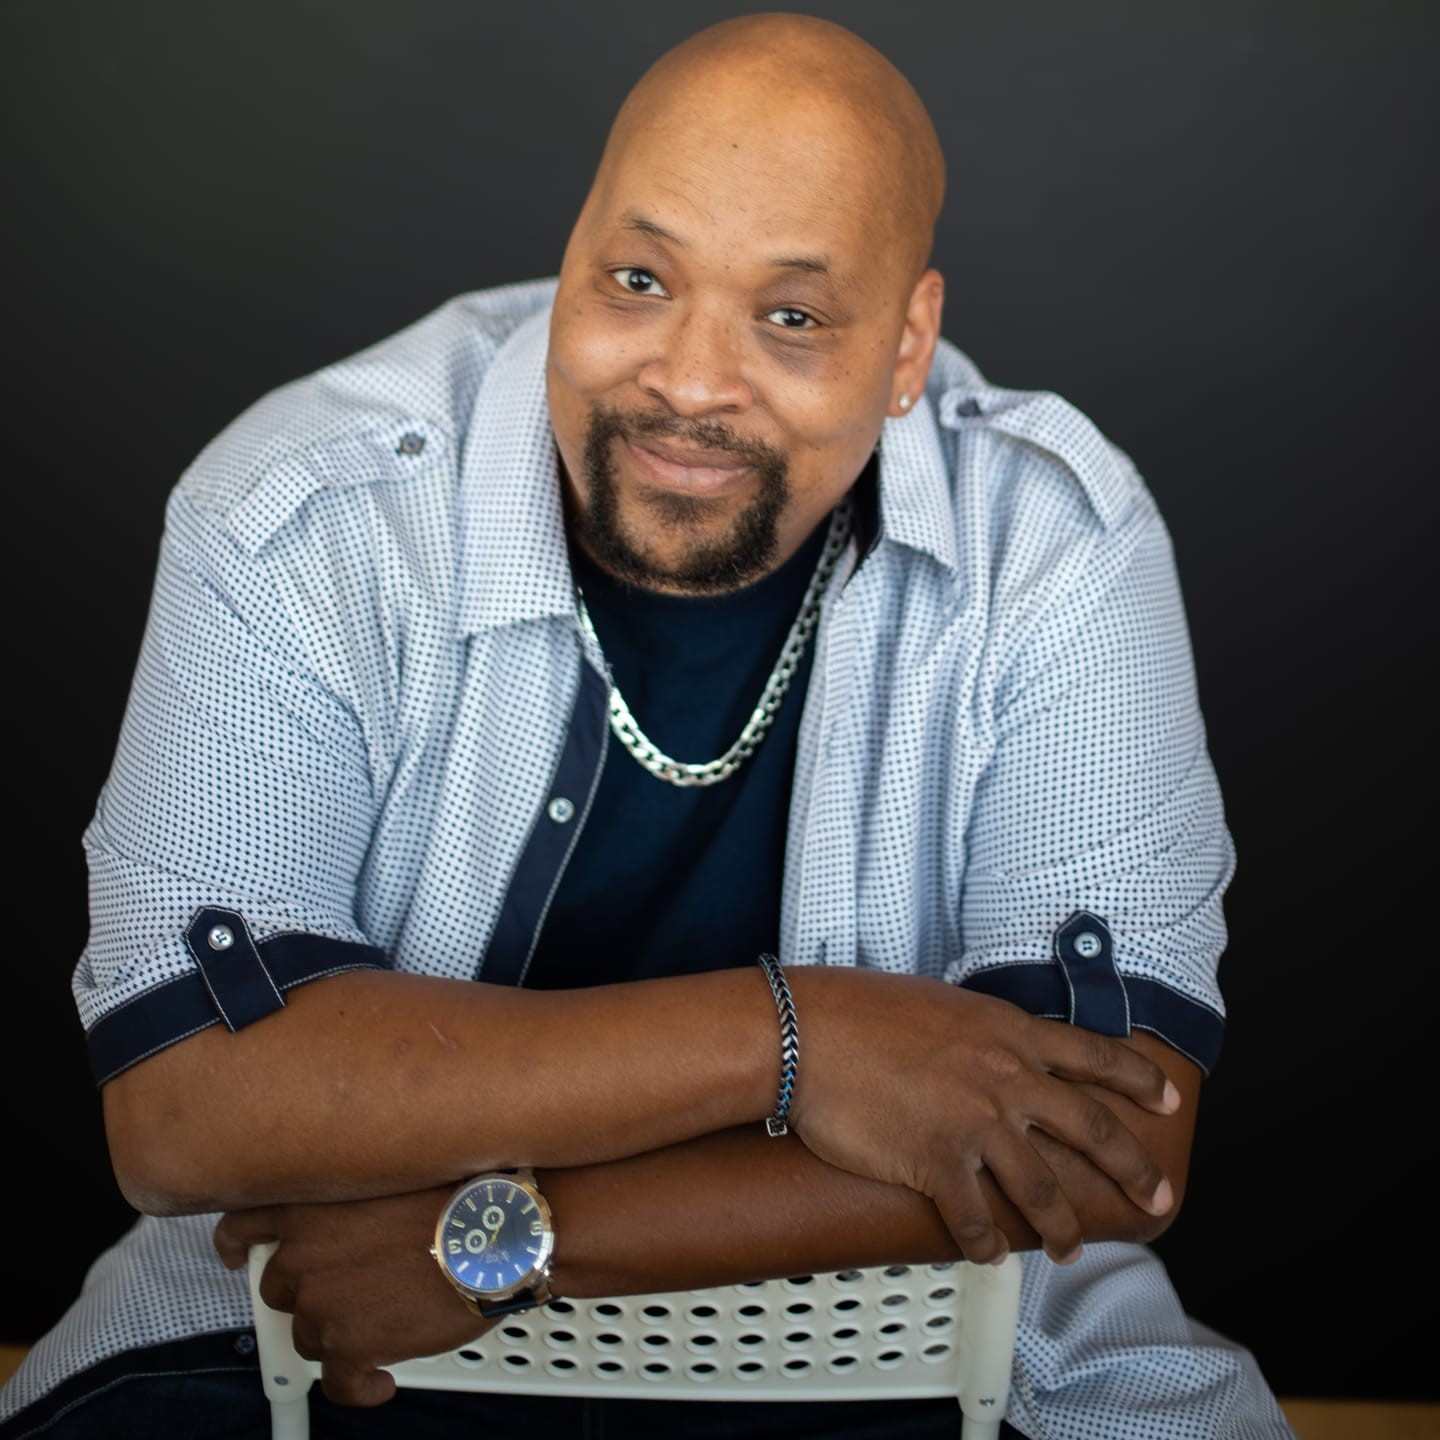 Milton Wyley Sat. 9:30 Show Funny Stop Comedy Club on May 27, 21:30@Funny Stop Comedy Club - Buy tickets and Get information on Funny Stop funnystop.online